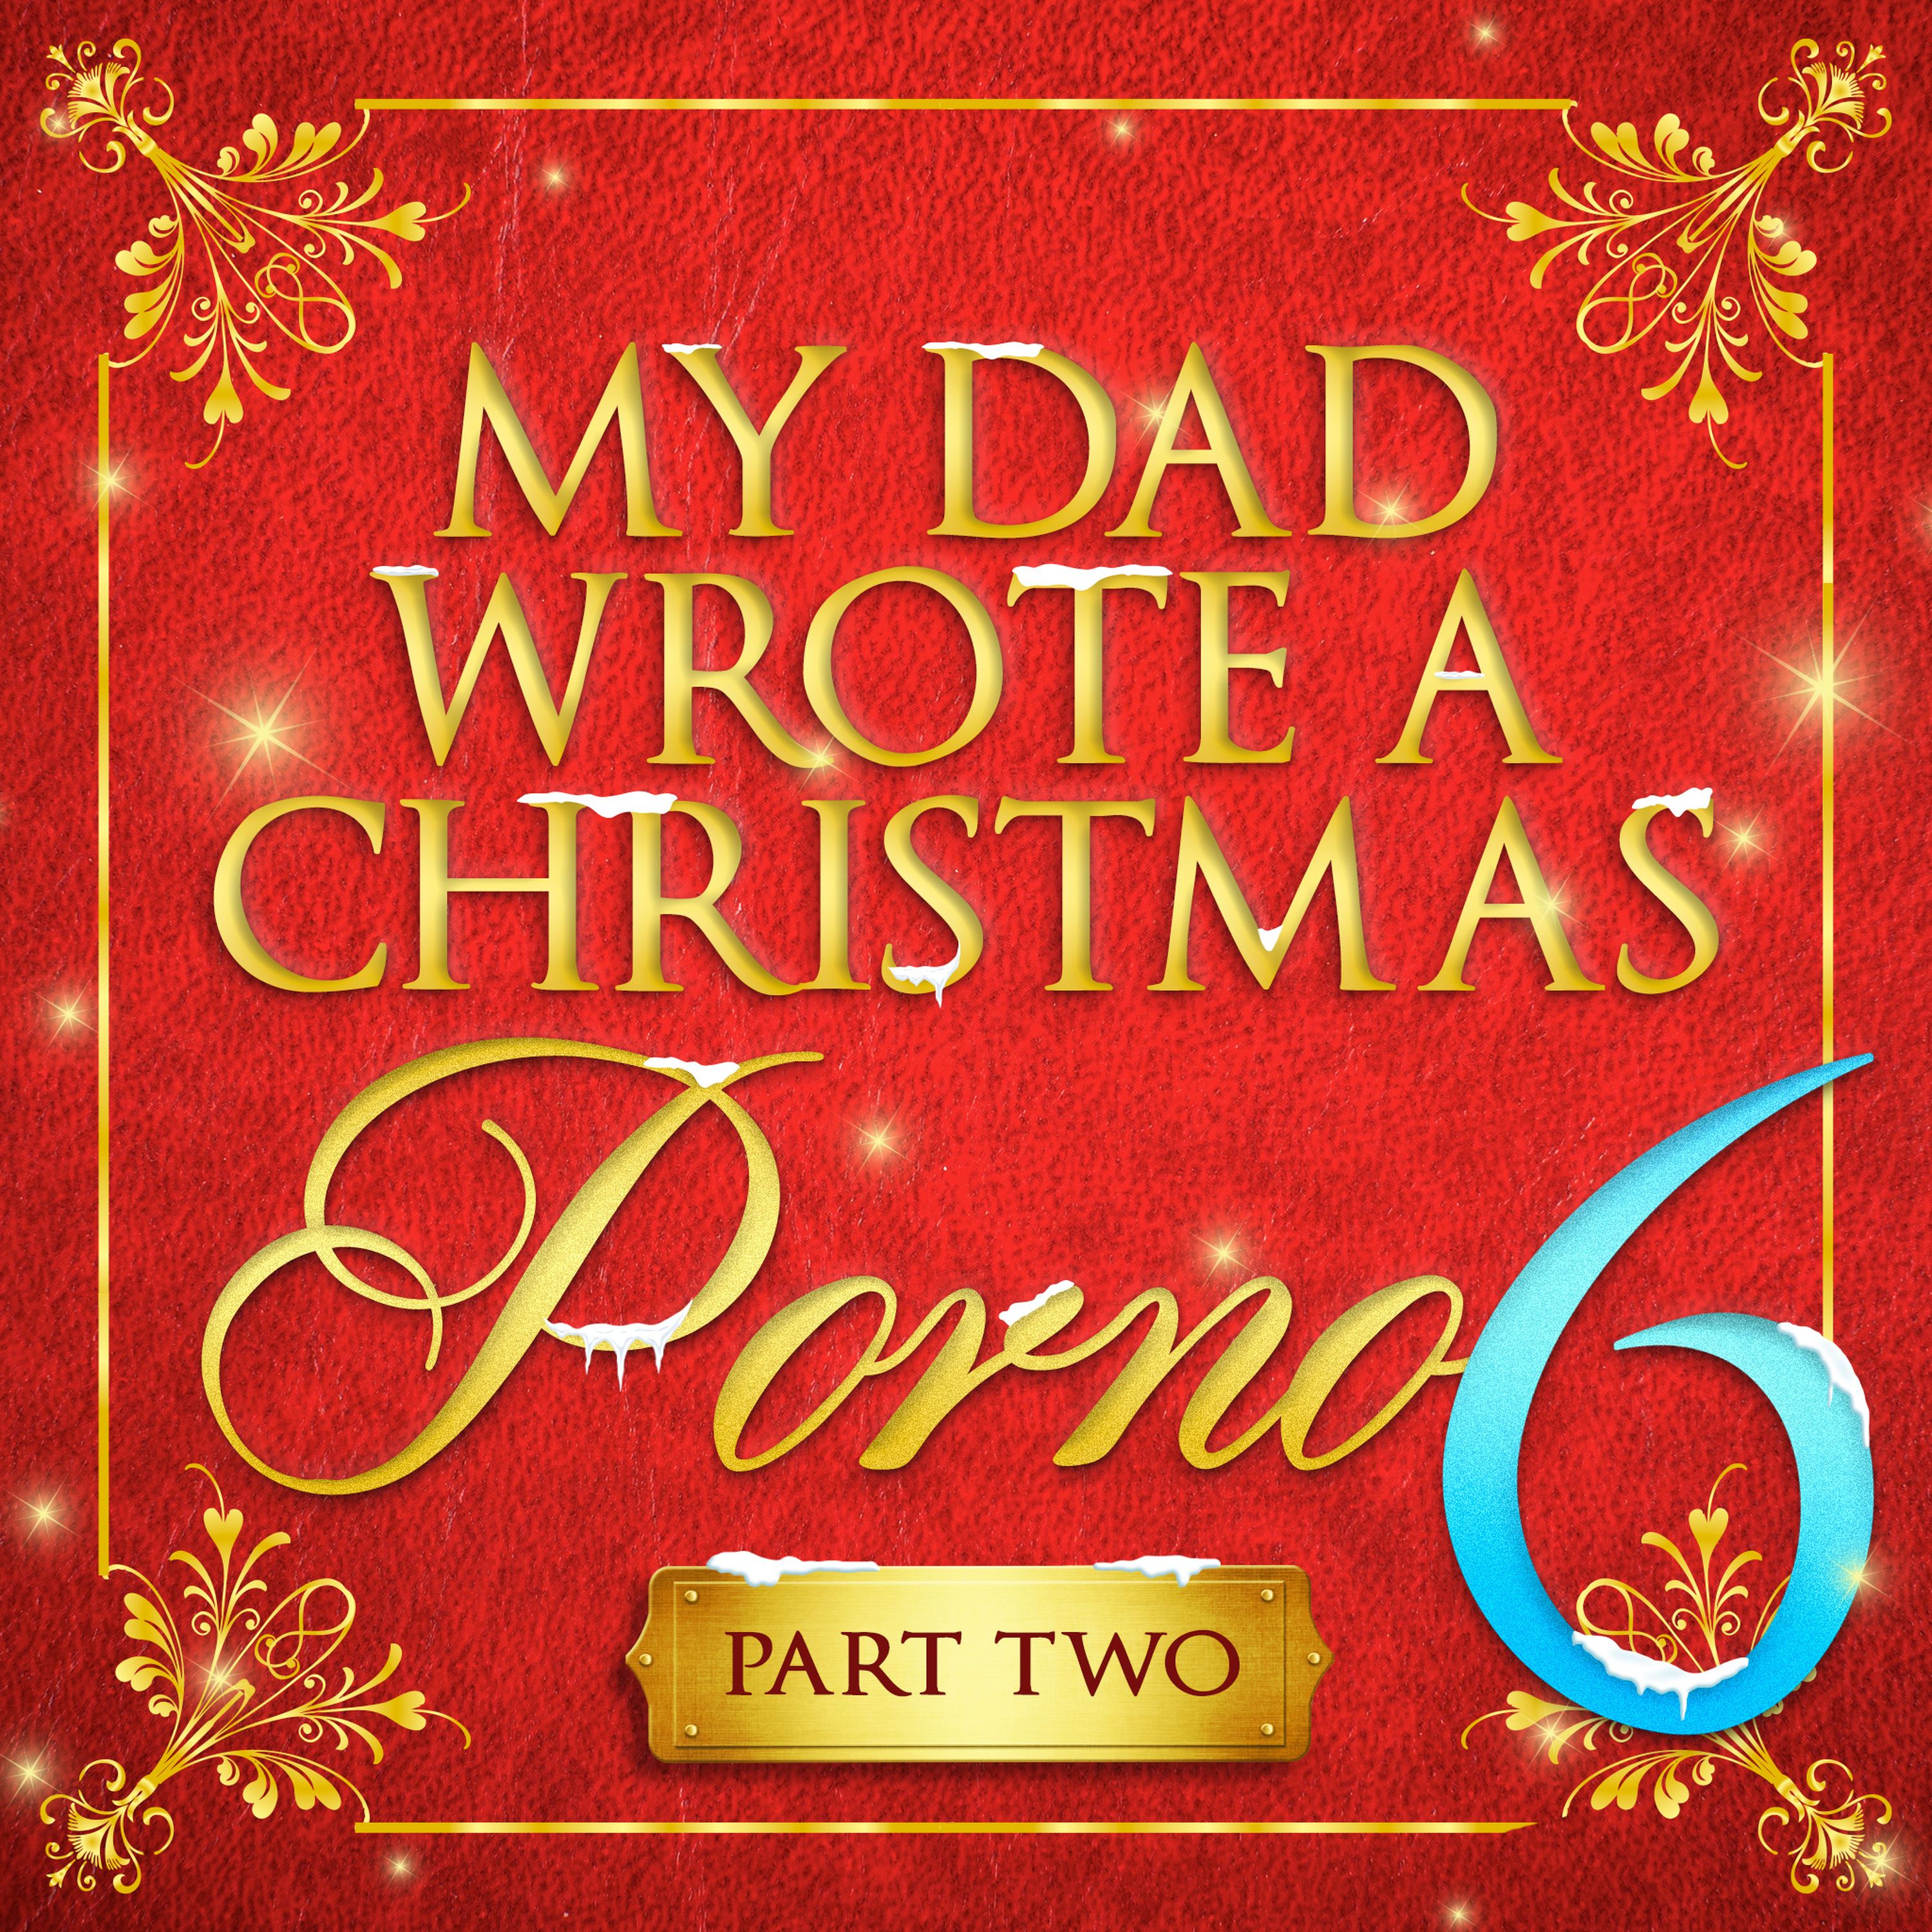 My Dad Wrote A Christmas Porno 6 - Part Two